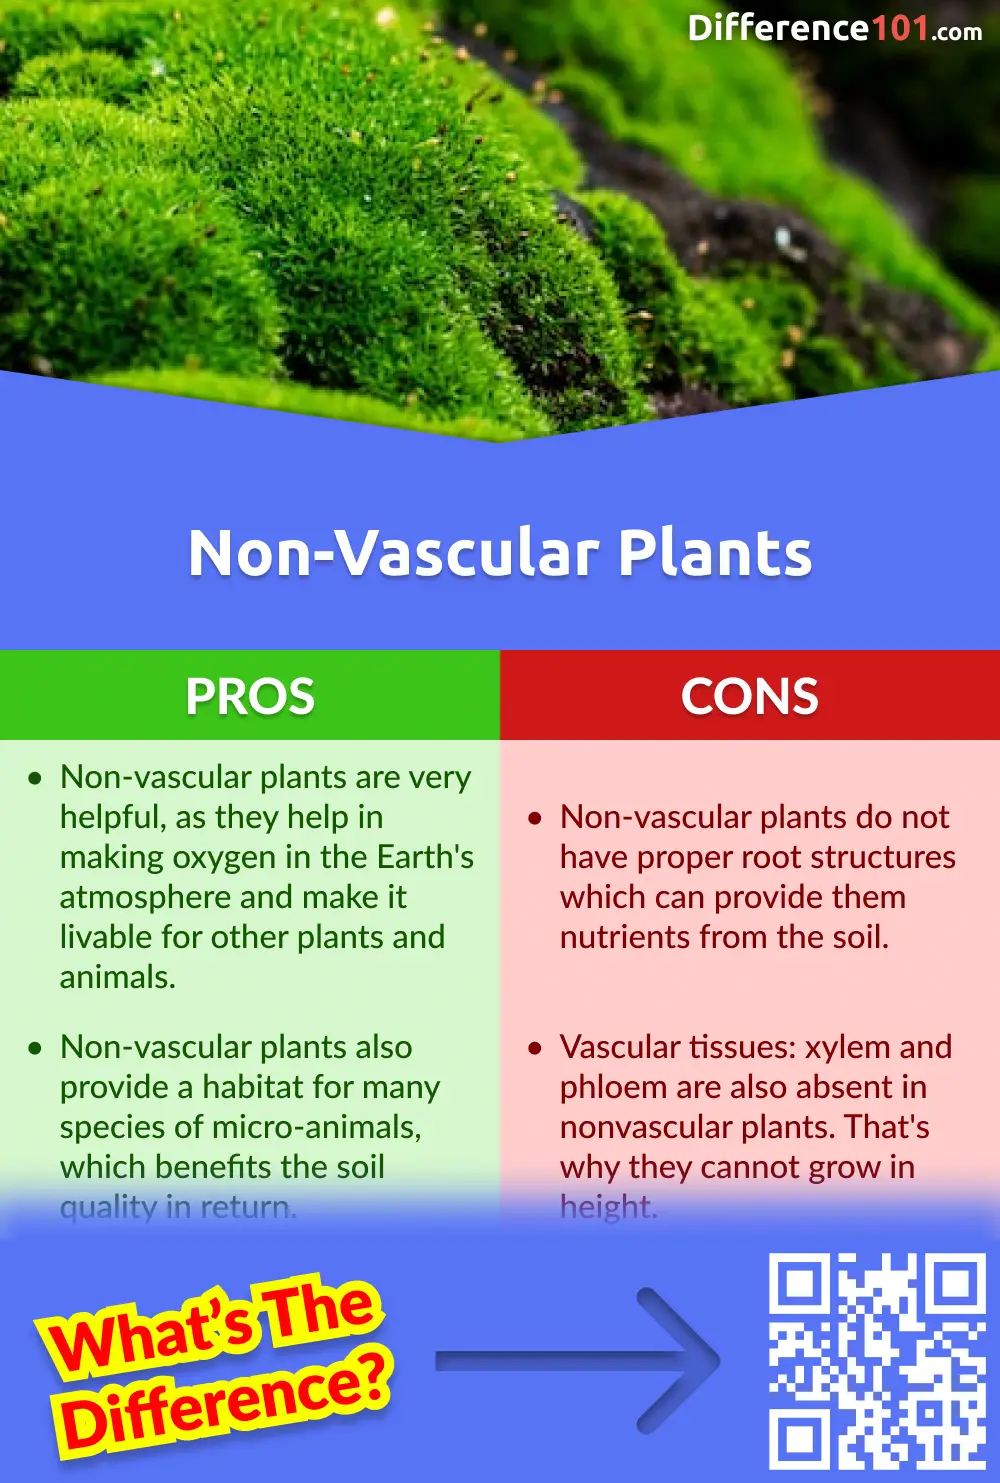 Non-vascular Plants Pros and Cons